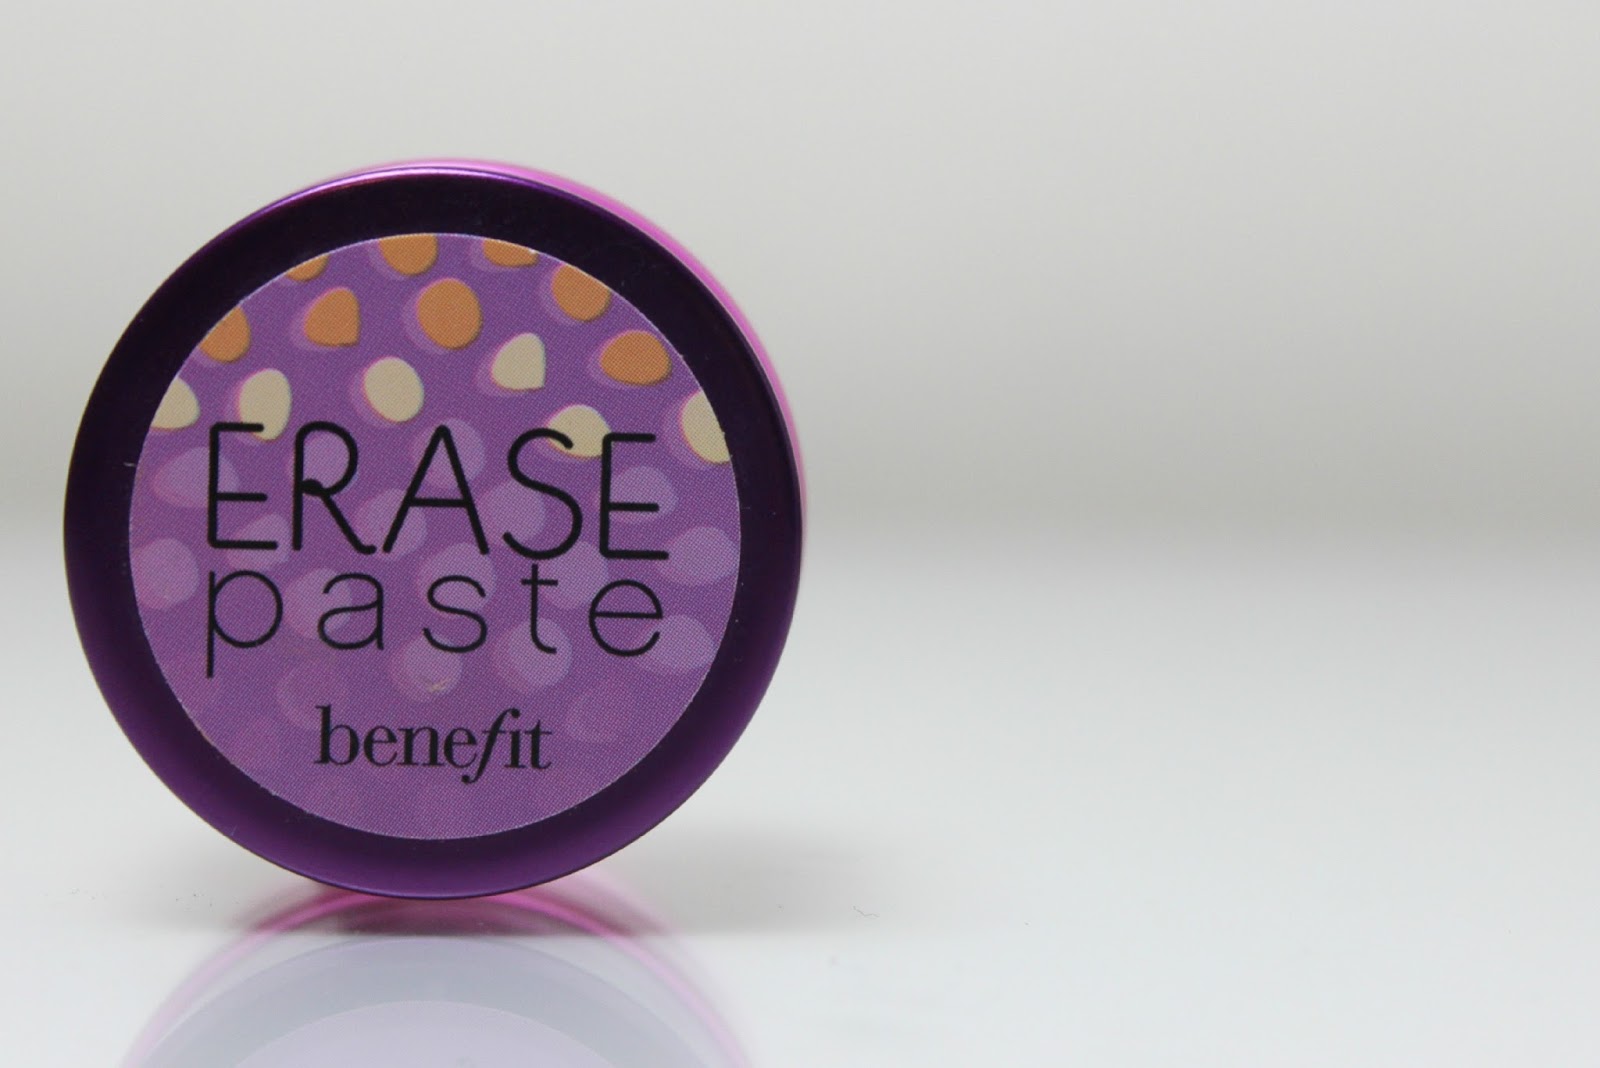 A picture of Benefit Erase Paste